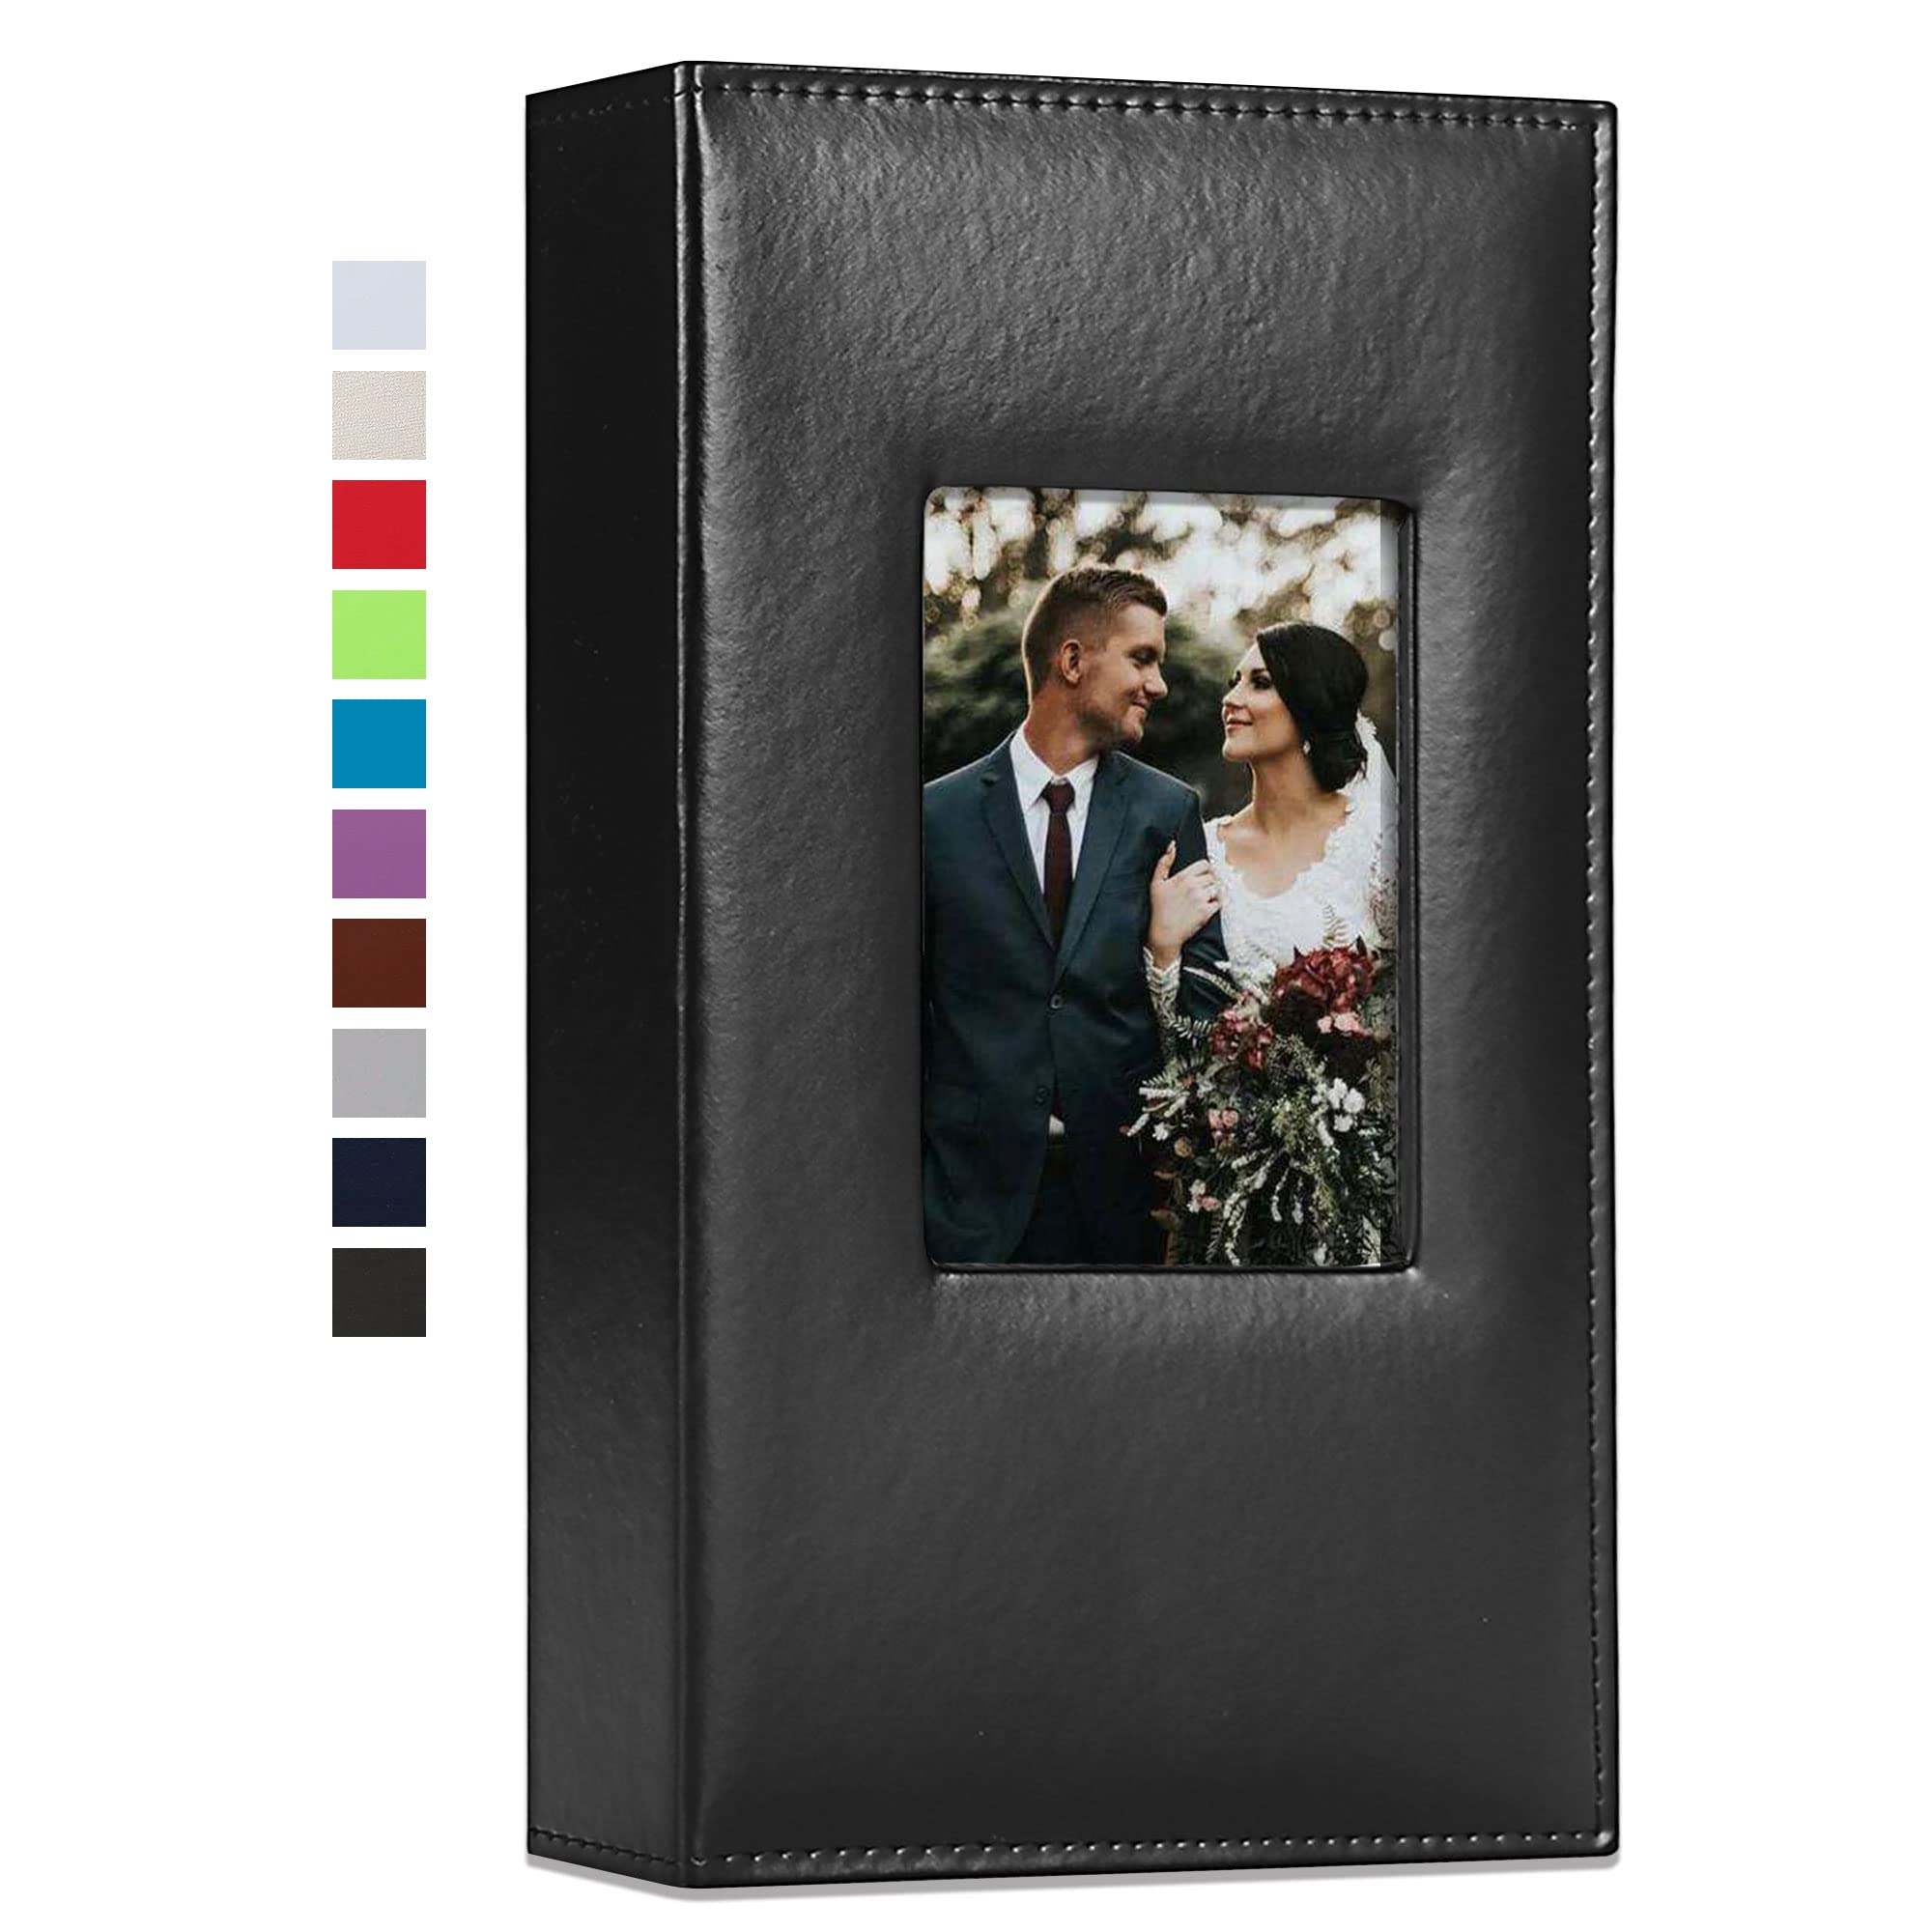 Vienrose Photo Album 4x6 300 Photos Leather Cover Extra Large Capacity  Picture Book with Pockets for Wedding Family Anniversary Baby 300 pockets  Black